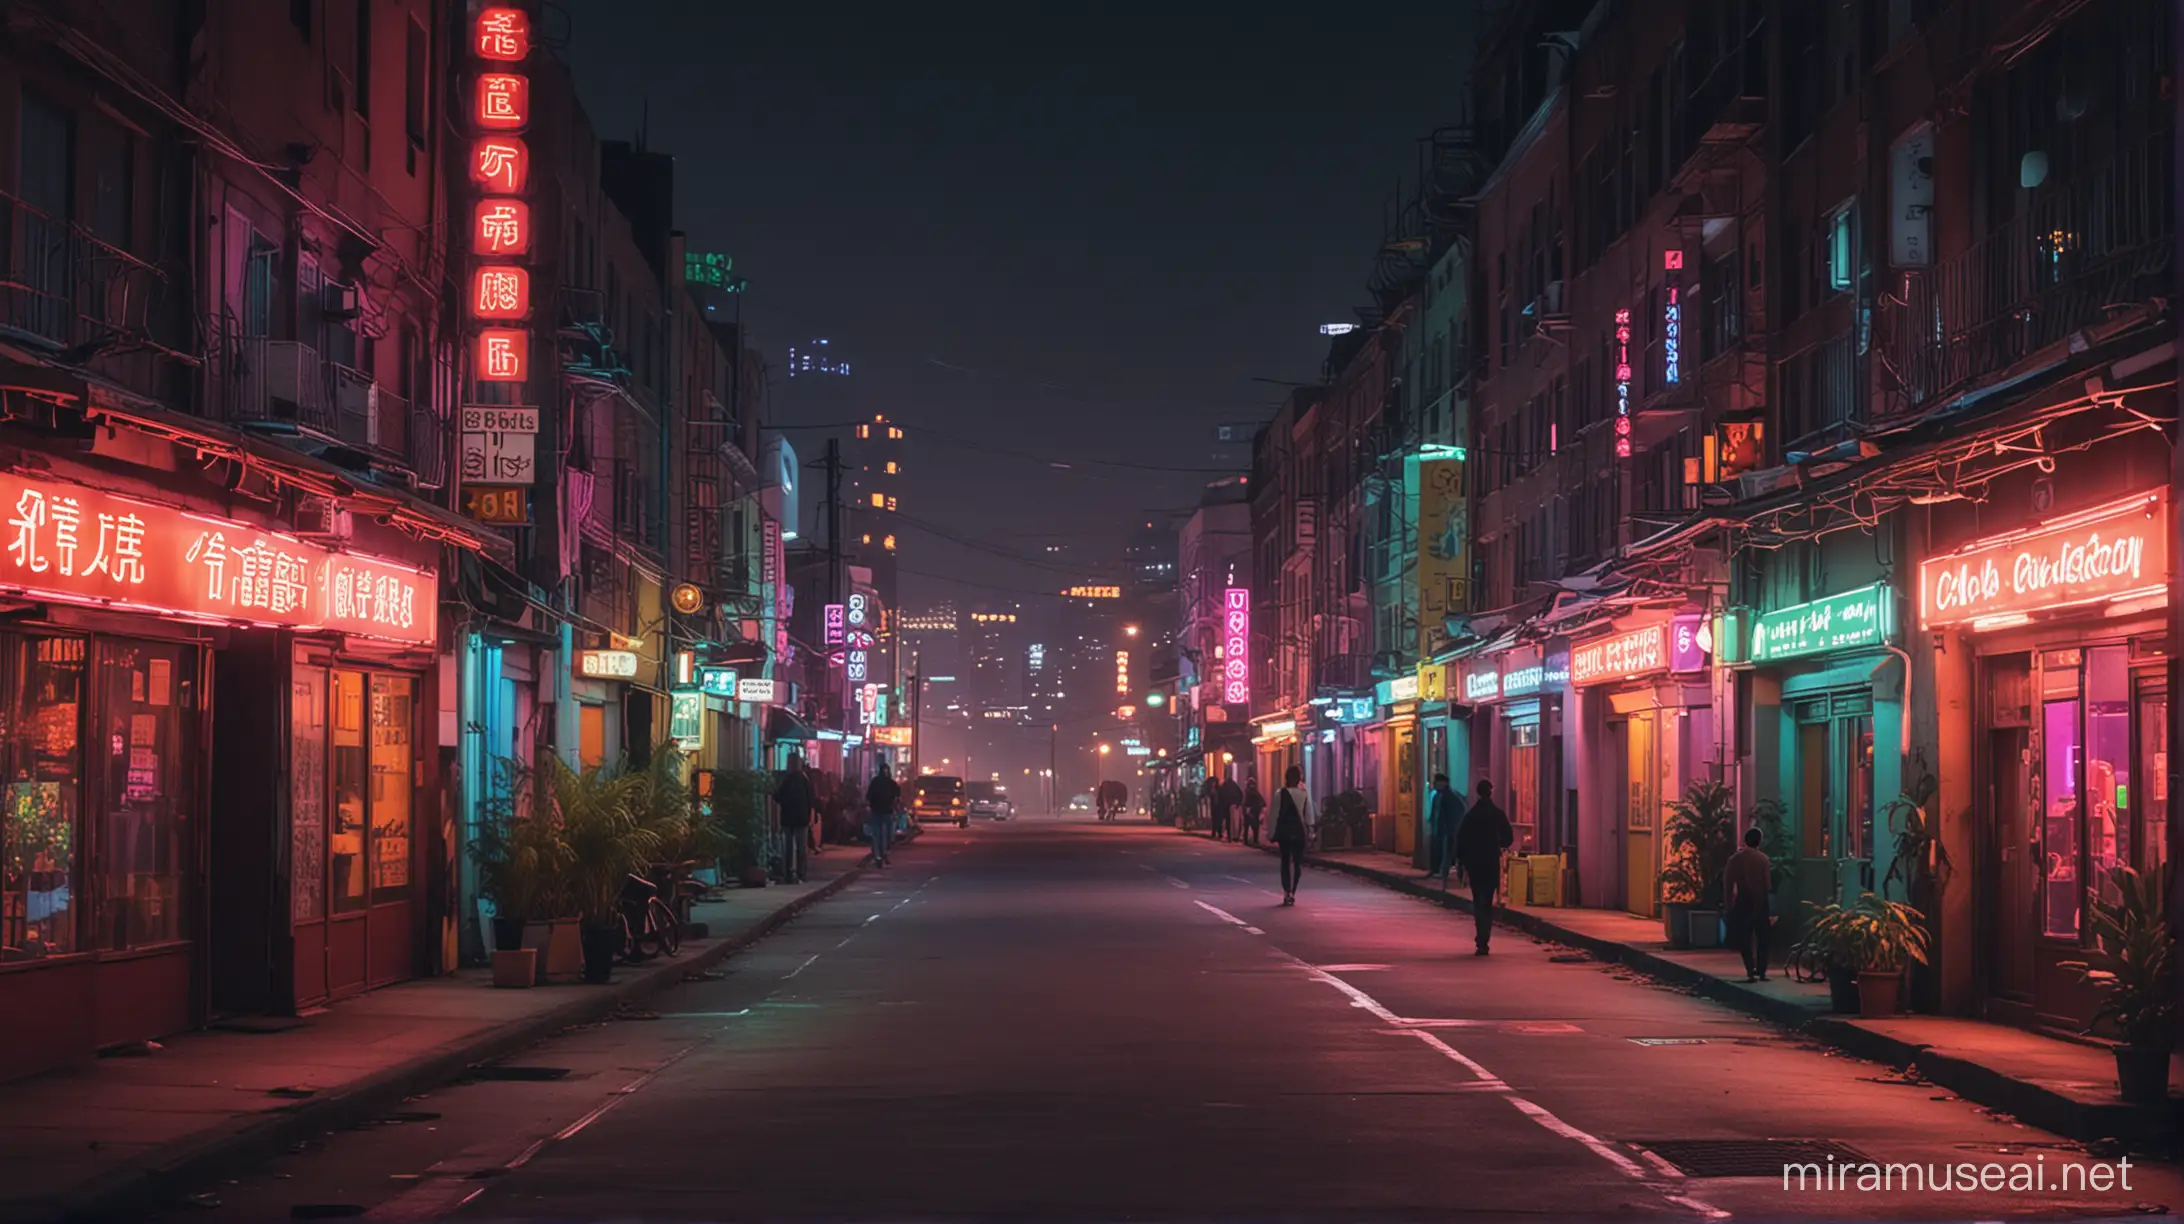 Eastern Europe today, factory area at night with neon lights, similar to chinatown. The meeting of two lonely souls in the thick of the downtown jungle flashing in colorful neon lights.